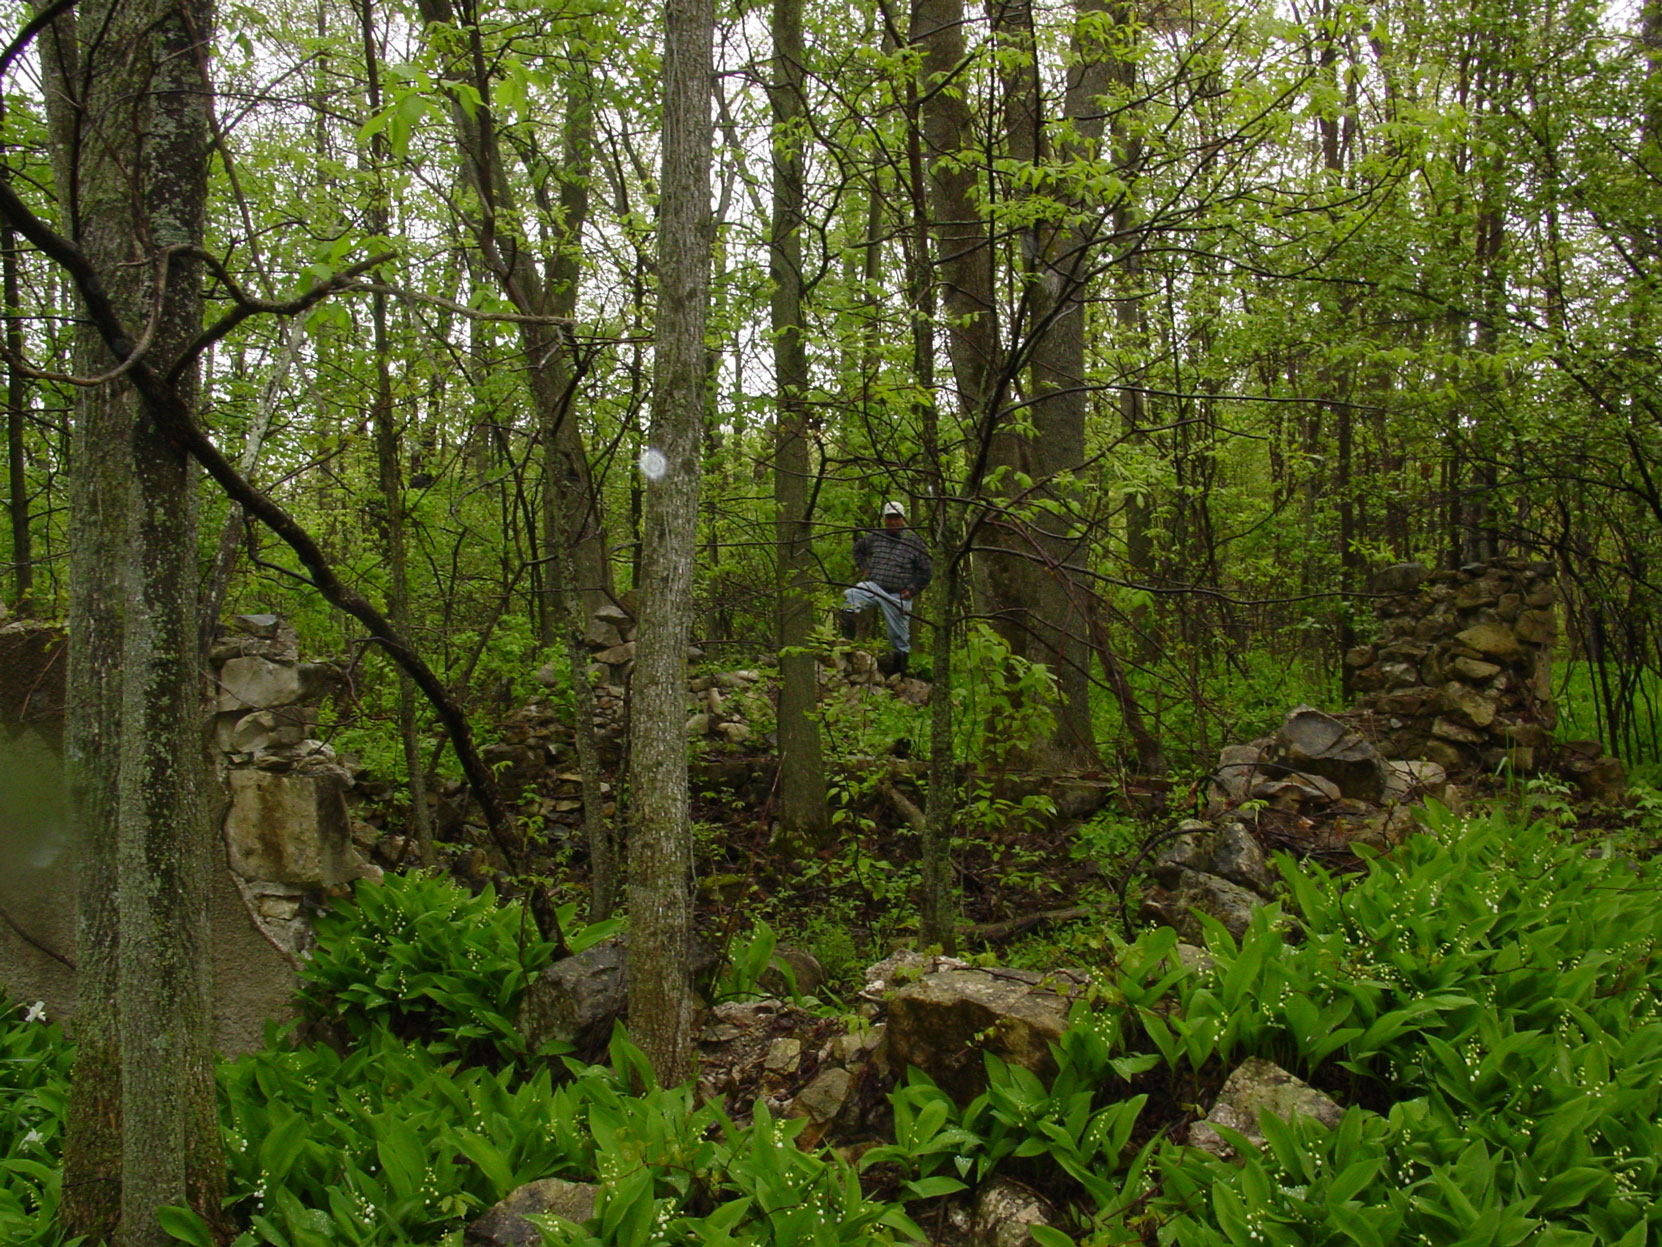 Landowner Murray Noble in what are believed to be the ruins of the Butchart's house at the Shallow Lkae factory site. Ruins of the Owen Sound Portland Cement Company factory, Shallow Lake, Ontario, 2003. (photo by author)